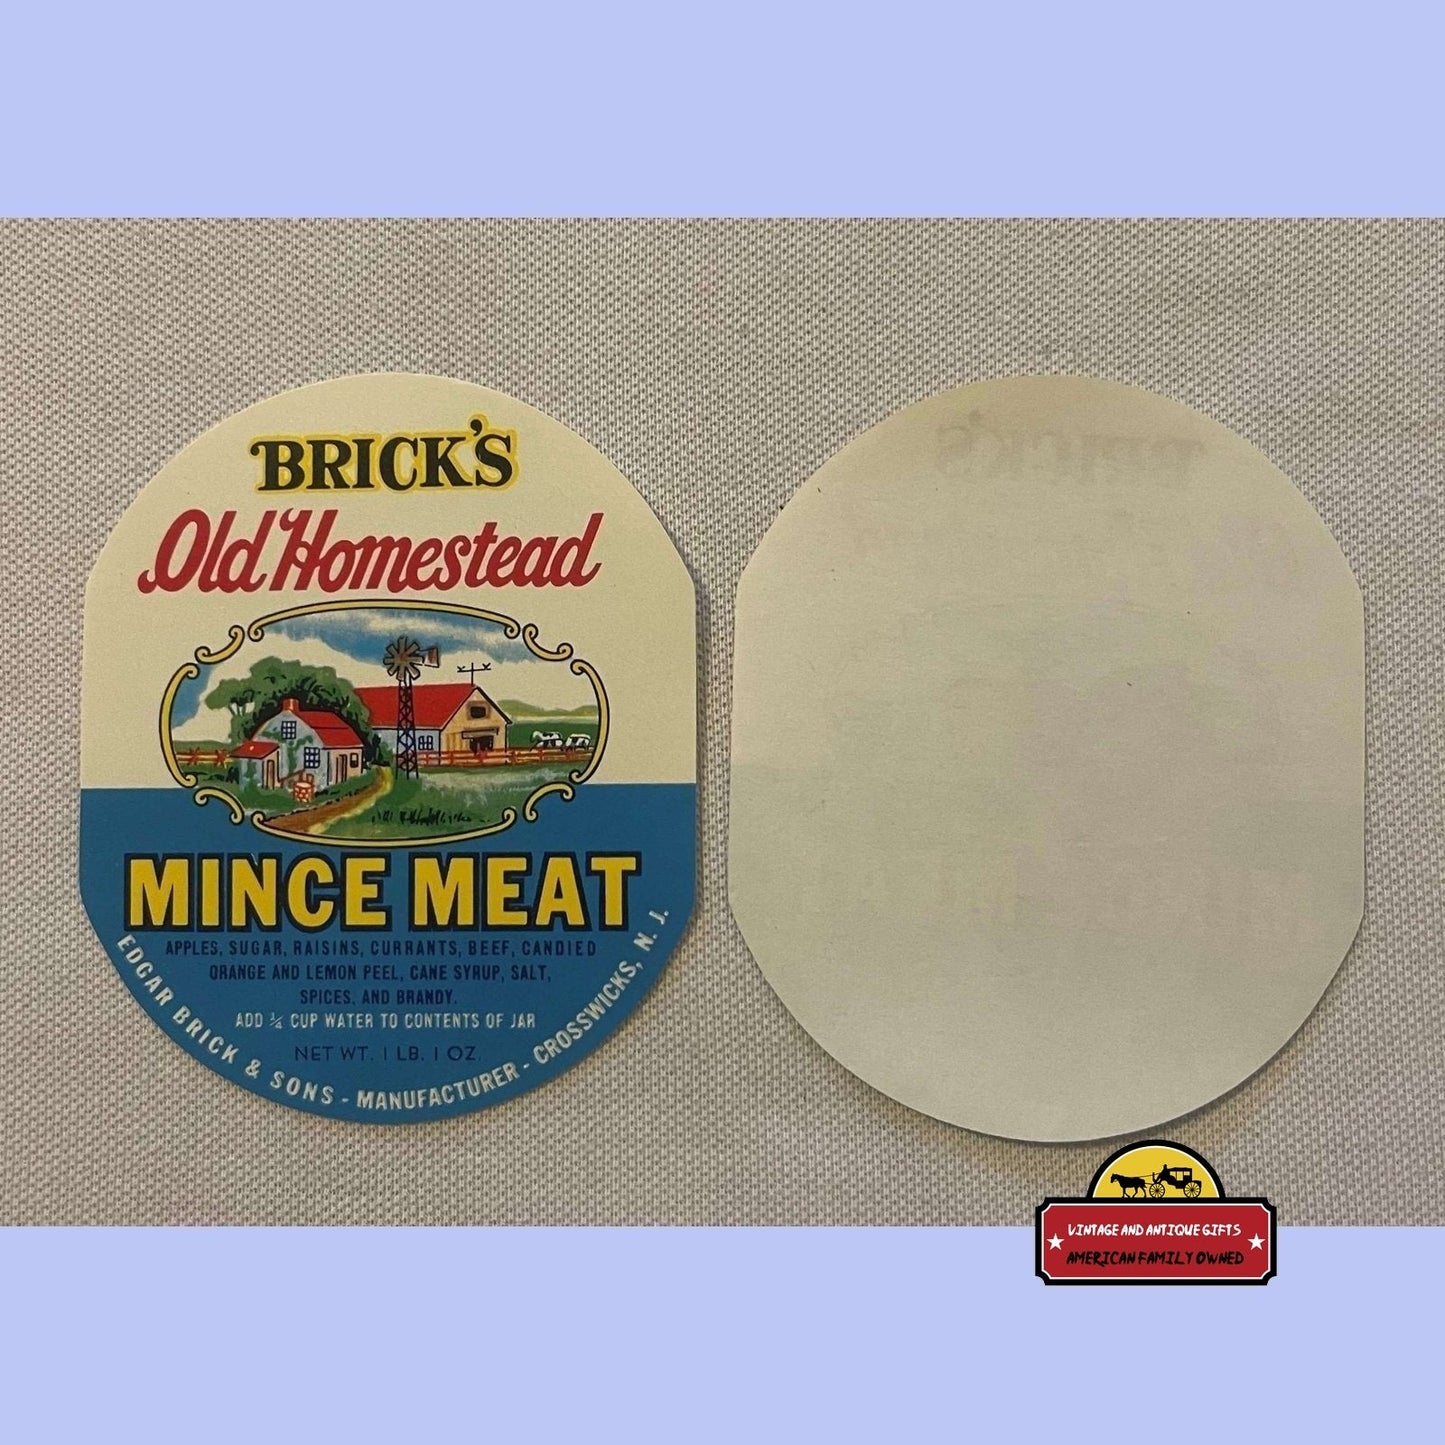 Rare Antique Vintage 1910s - 1930s Old Homestead Mince Meat Label Advertisements and Gifts Home page - Exquisite